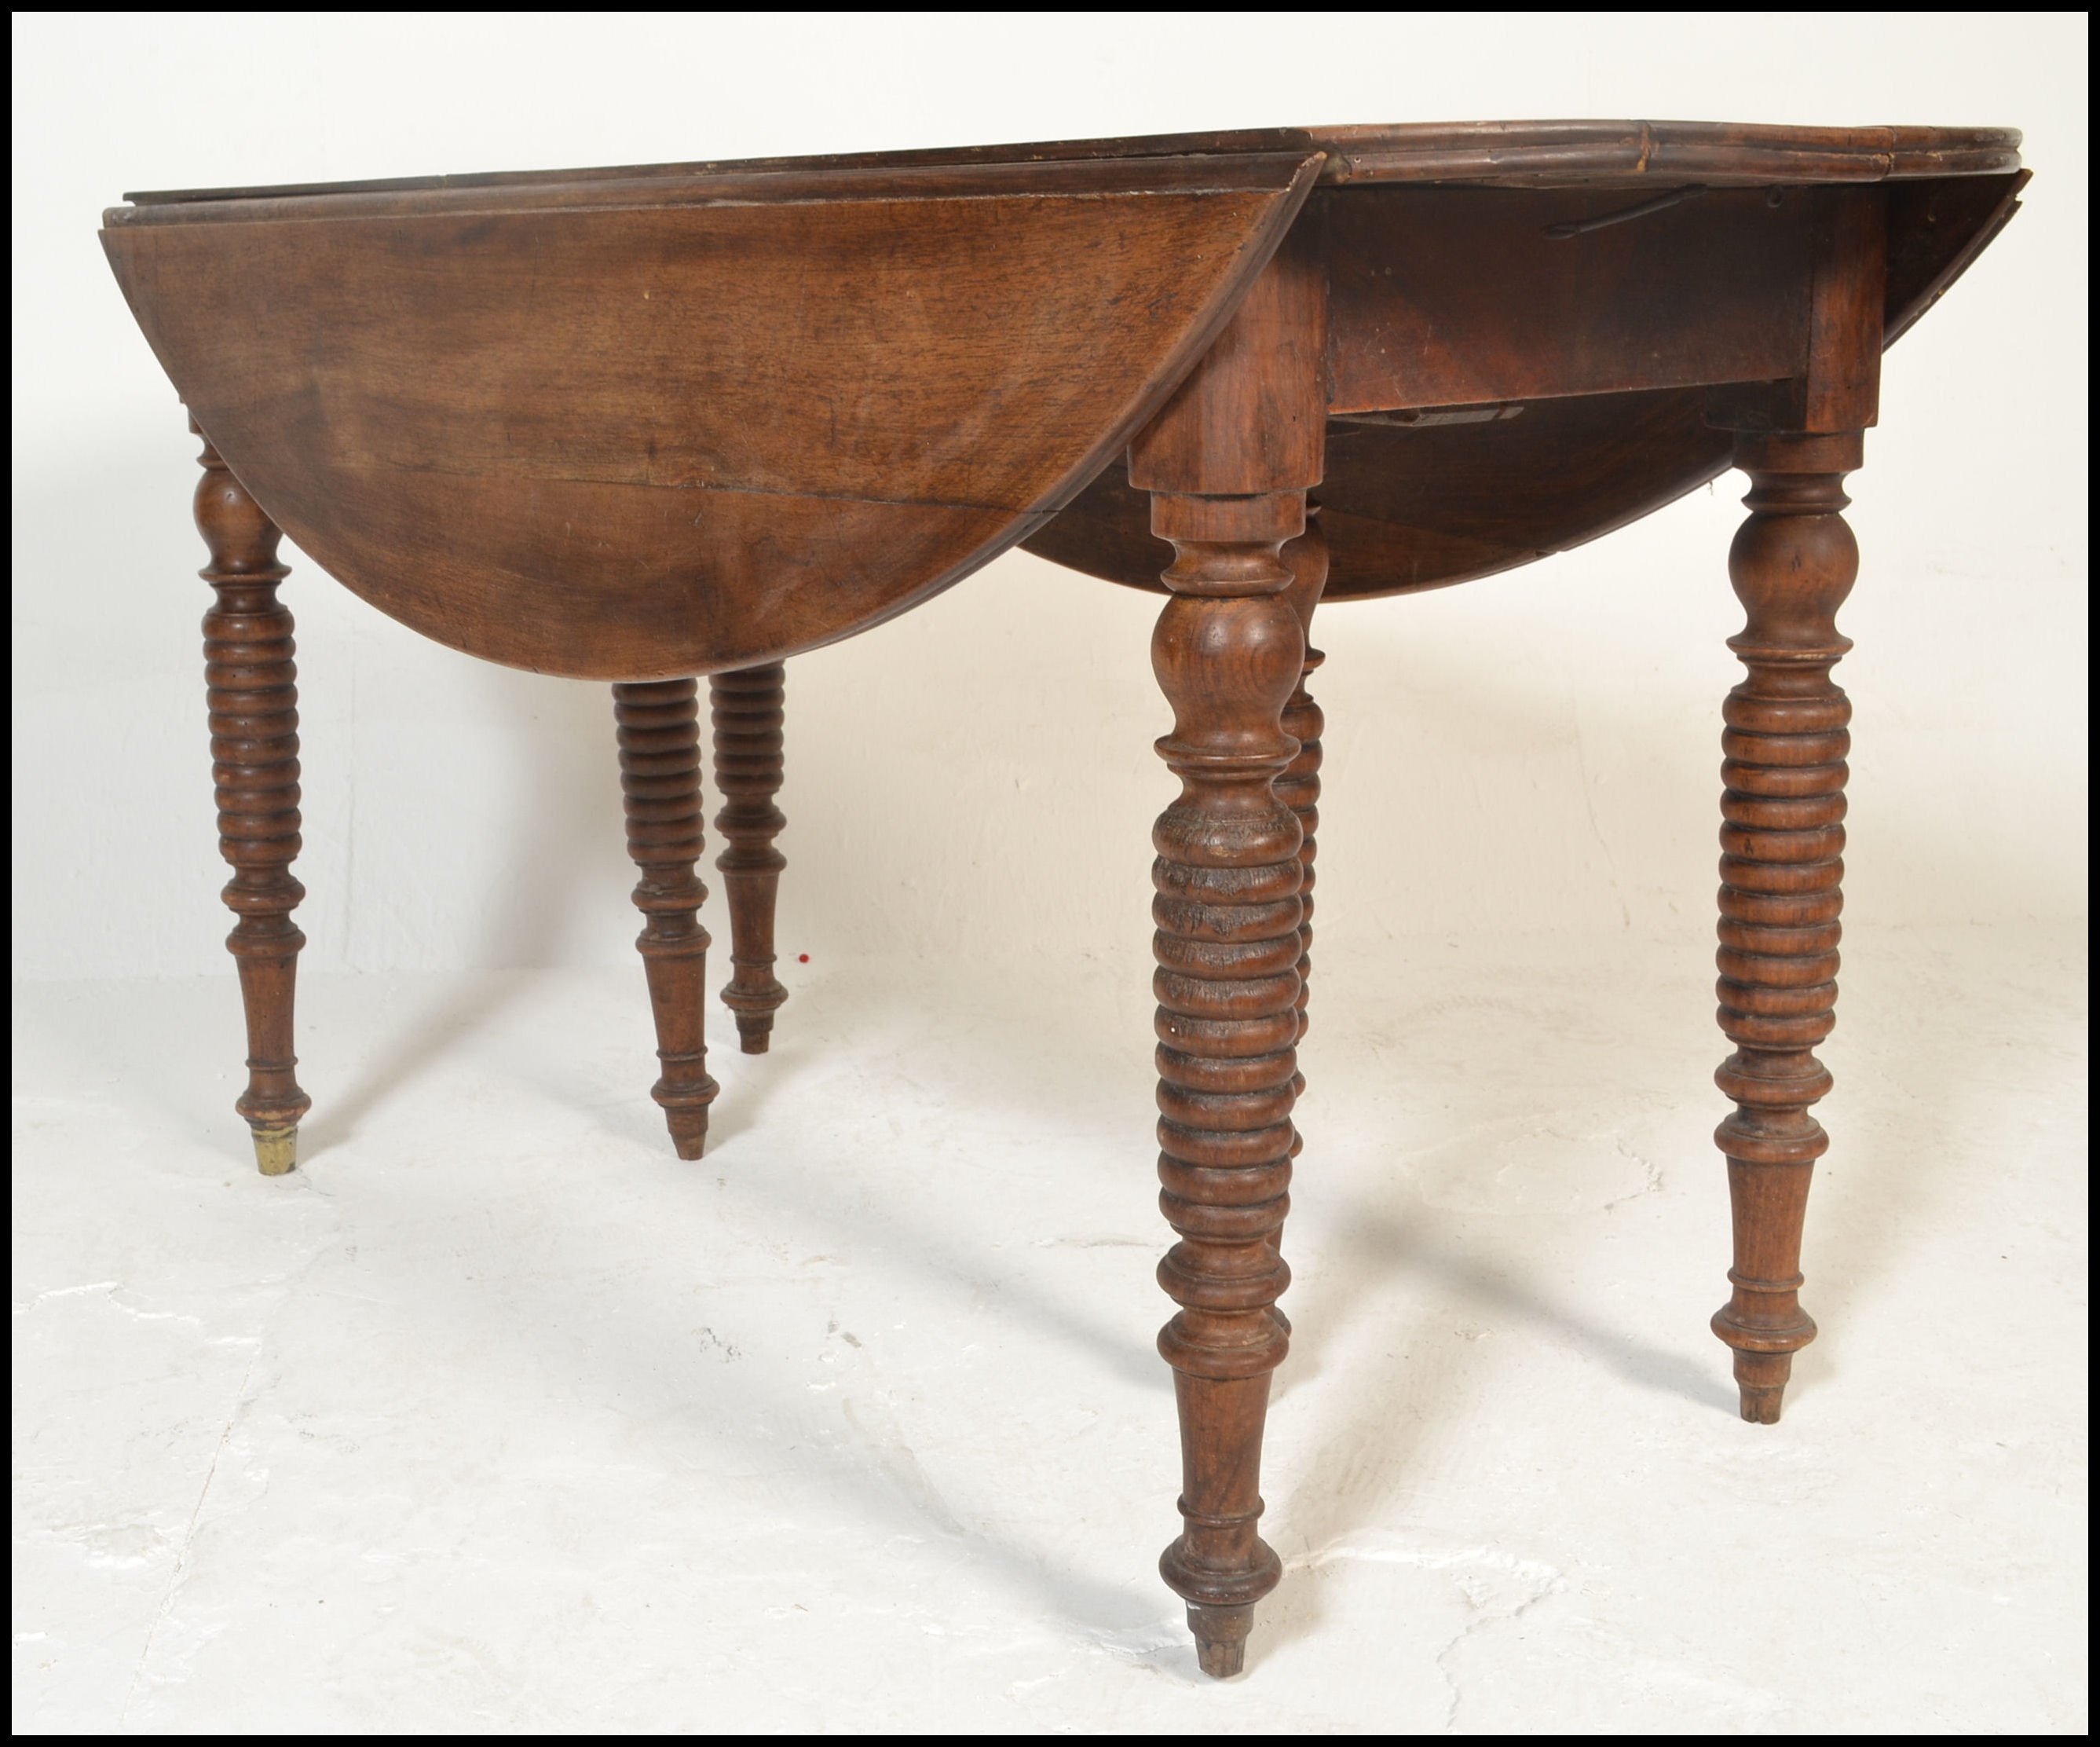 A 19th century French fruit wood drop leaf dining